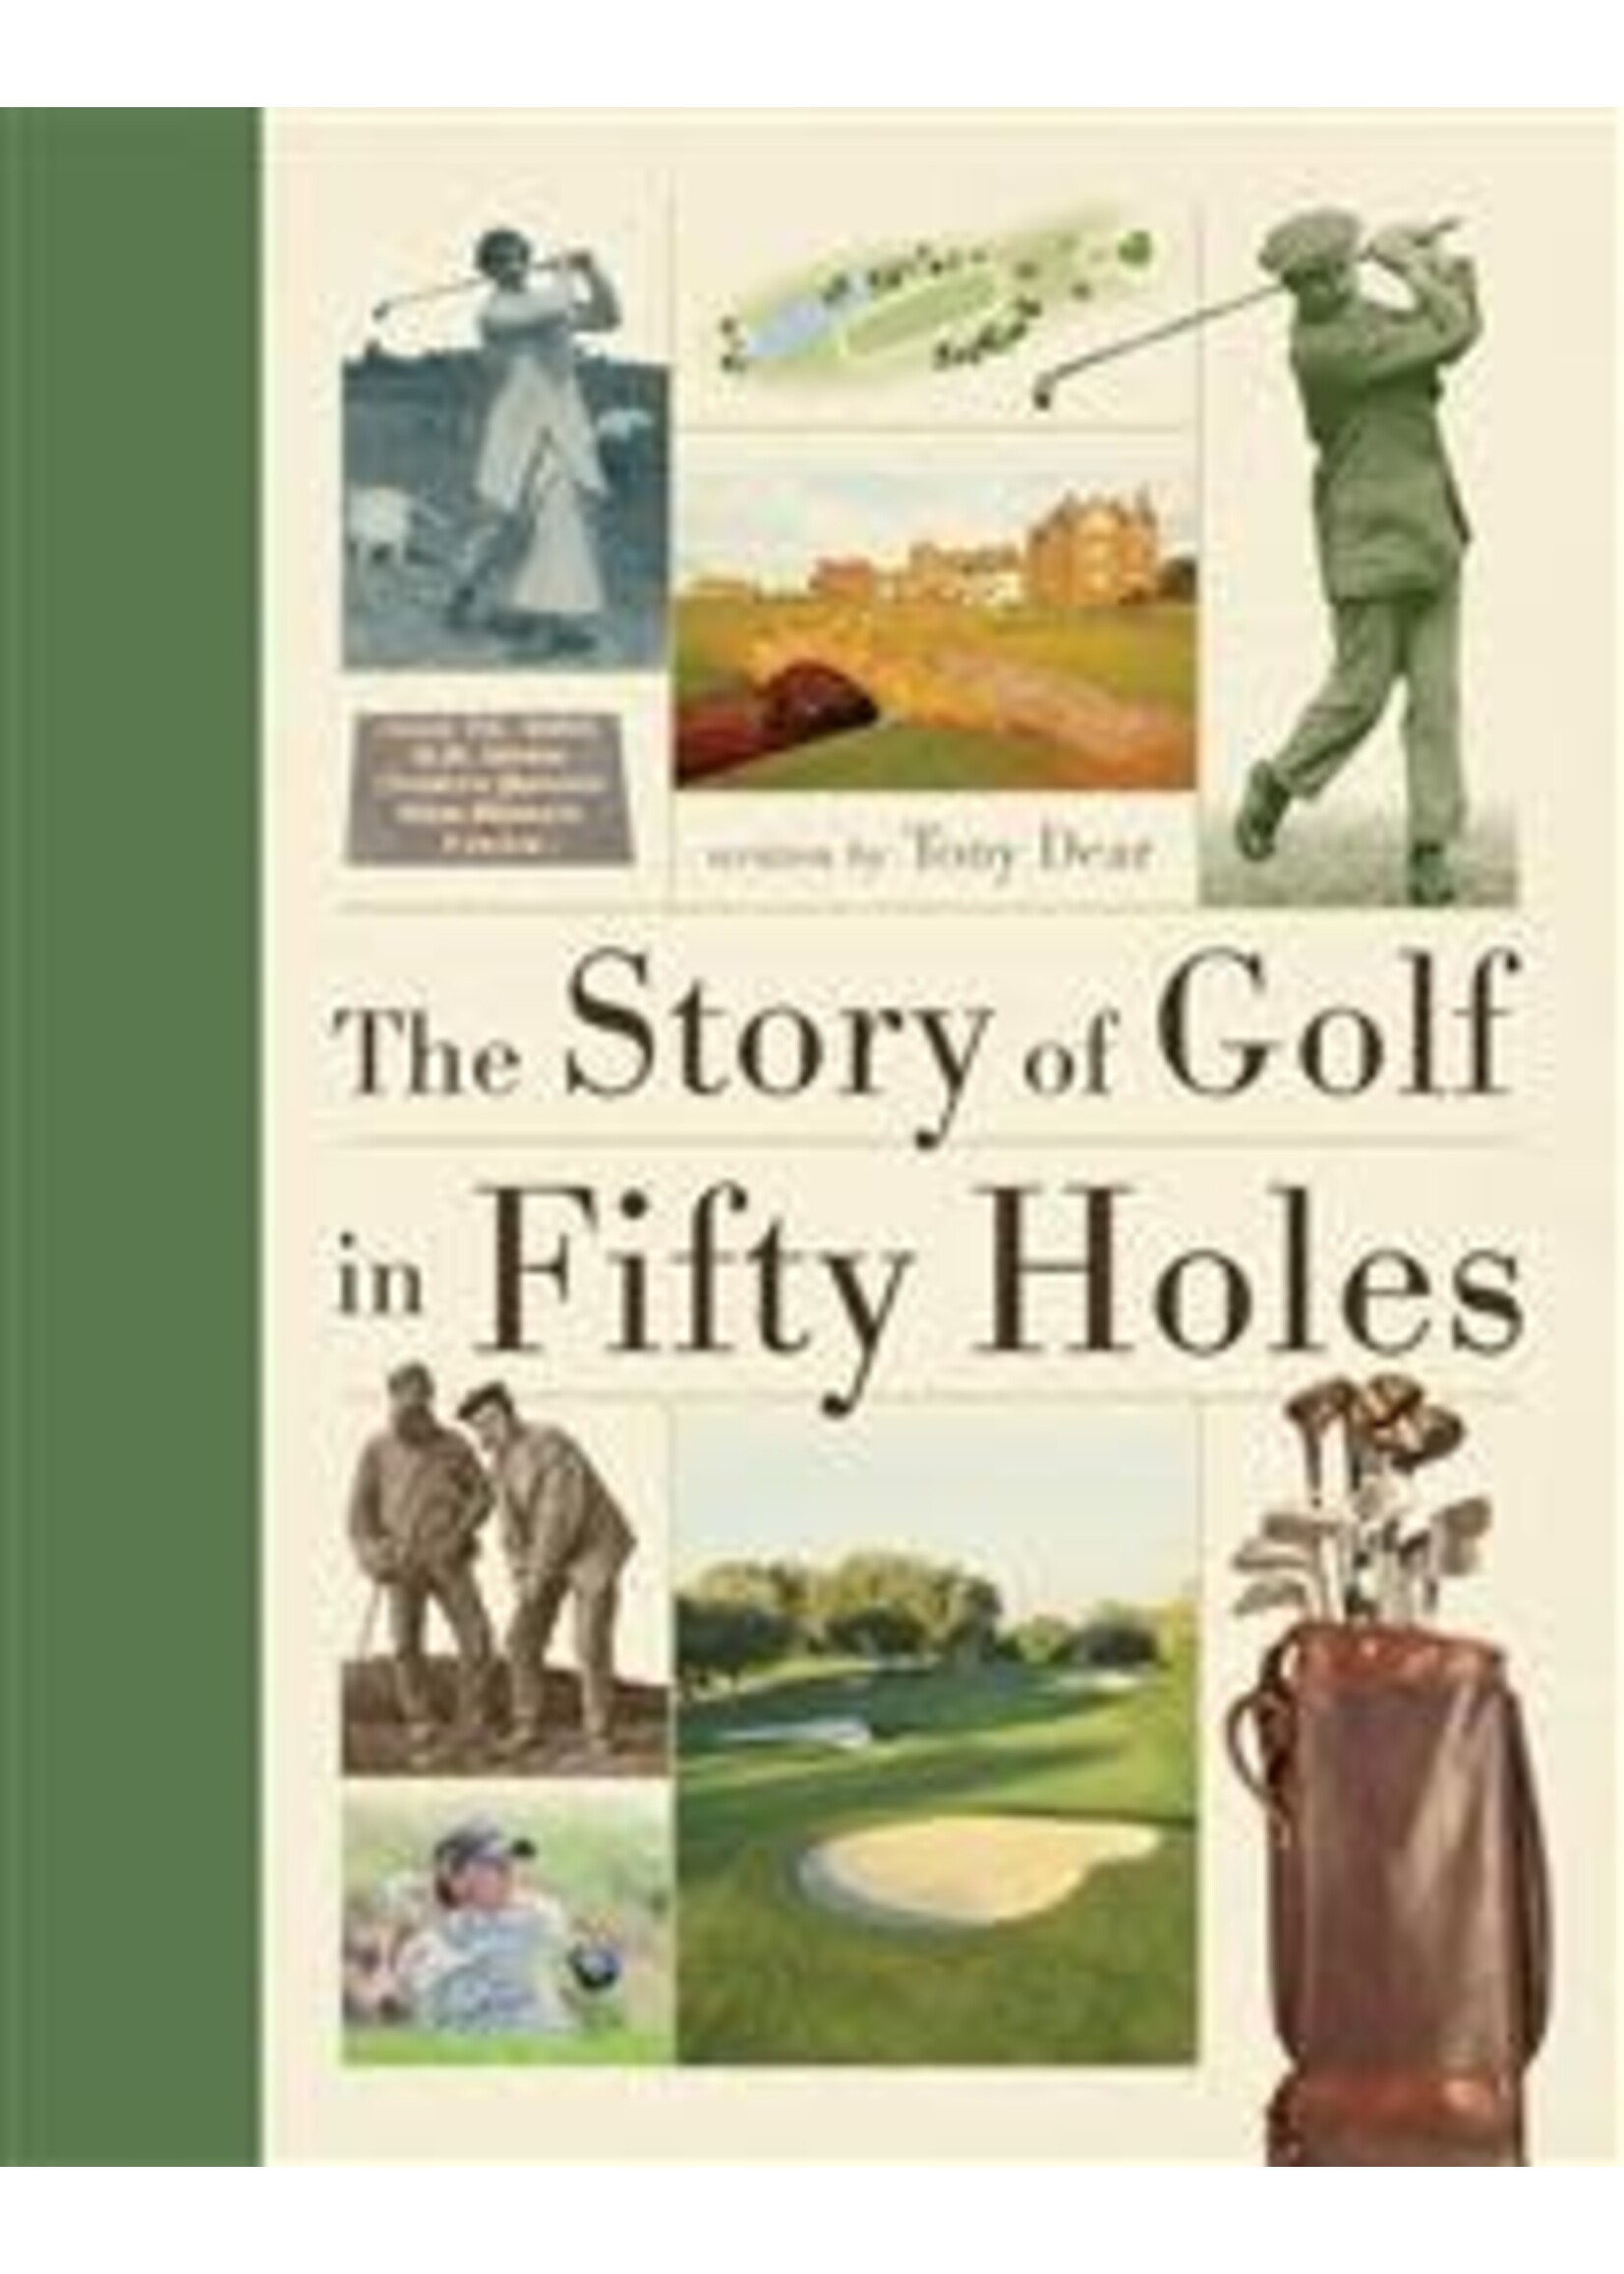 The Story of Golf in Fifty Holes by Tony Dear